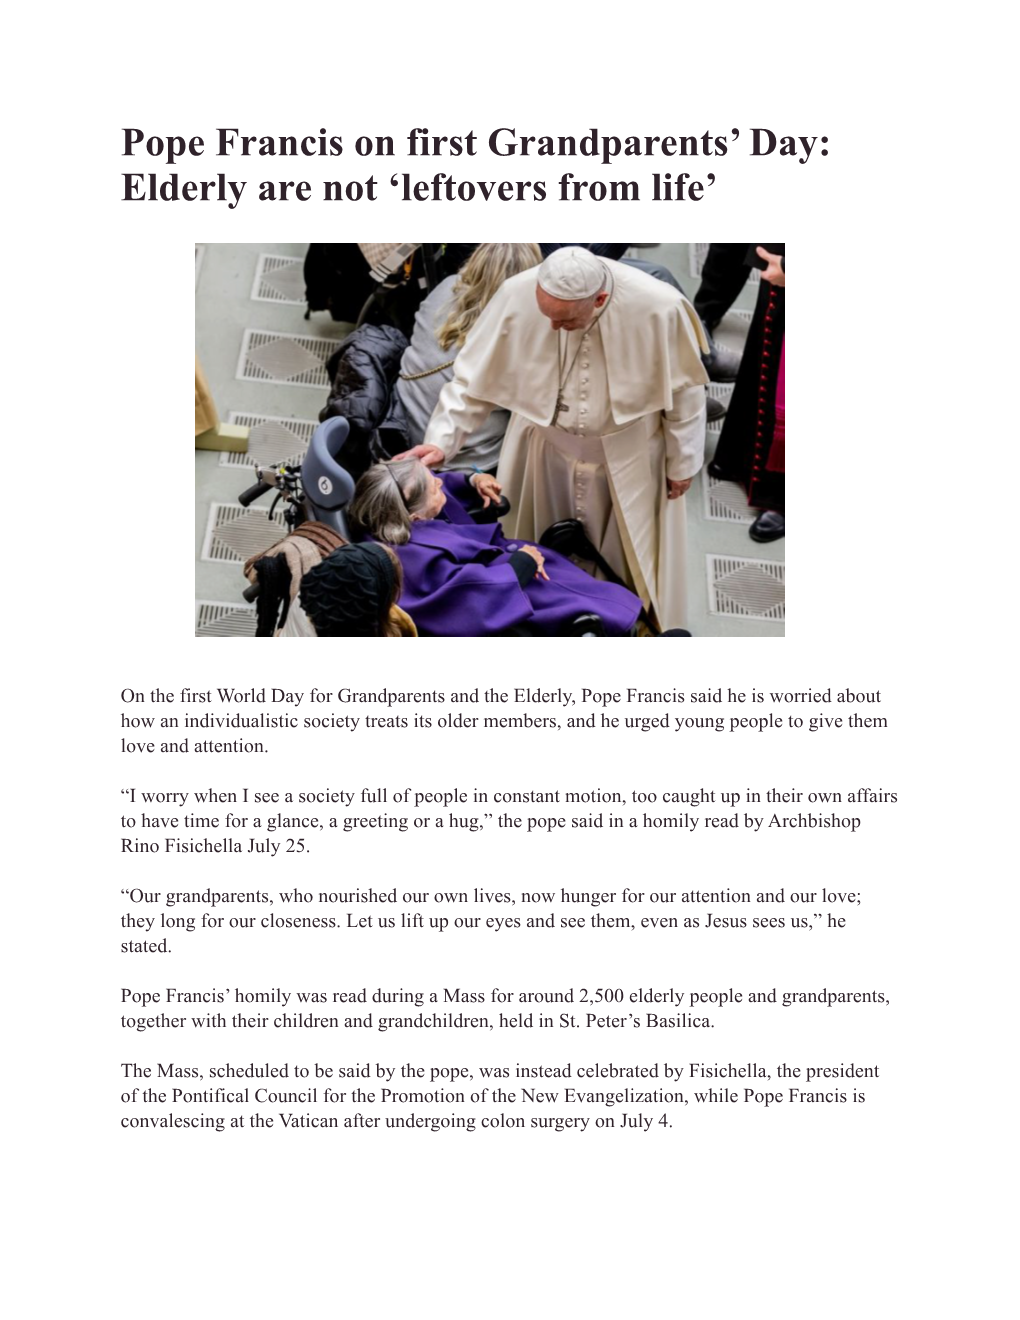 Pope Francis on First Grandparents' Day: Elderly Are Not 'Leftovers from Life'